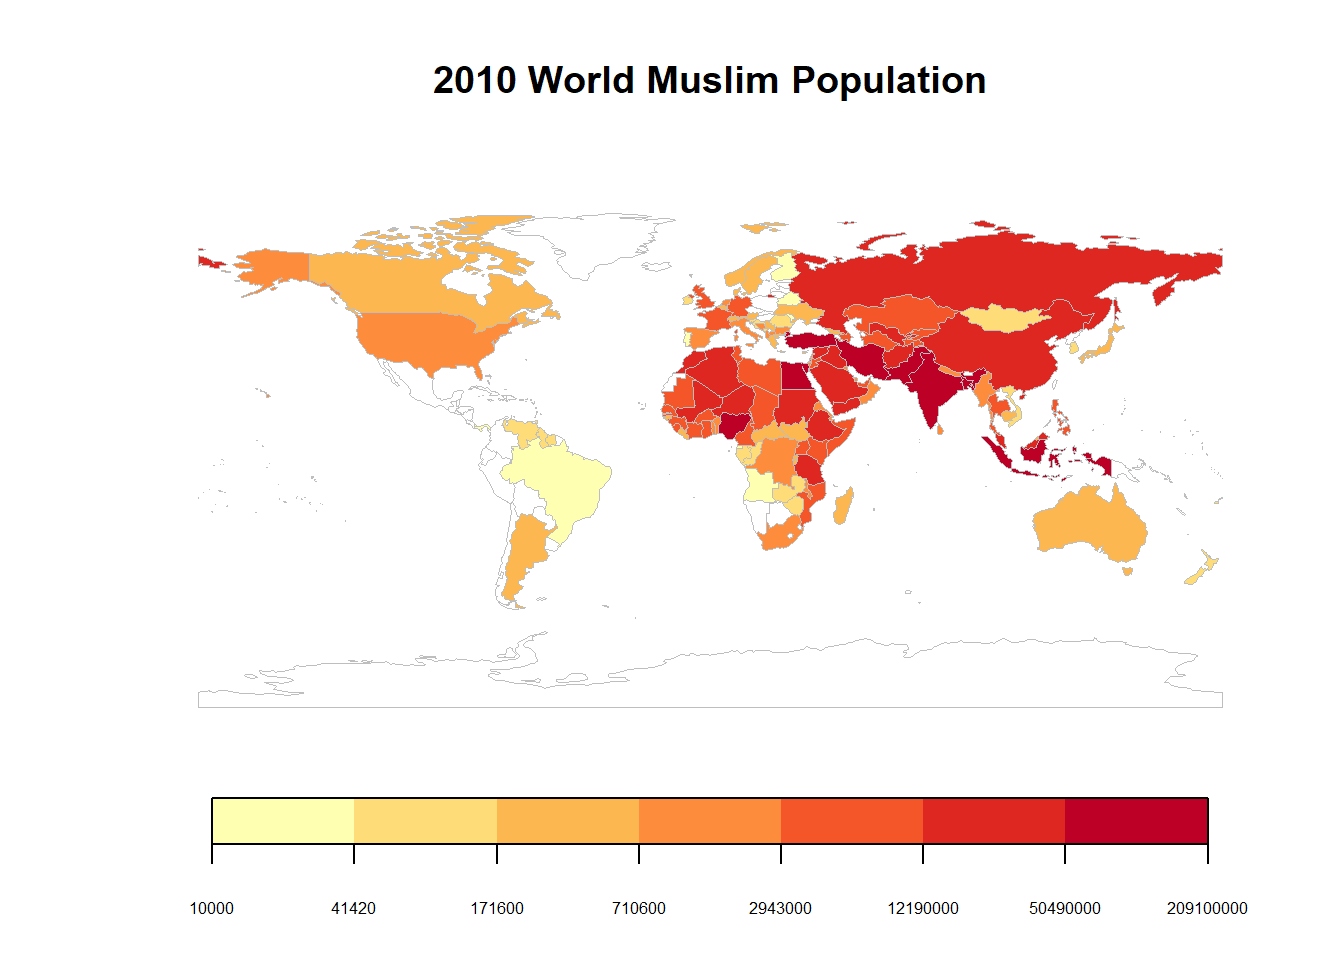 Country Heat Map of Muslim Population in 2010